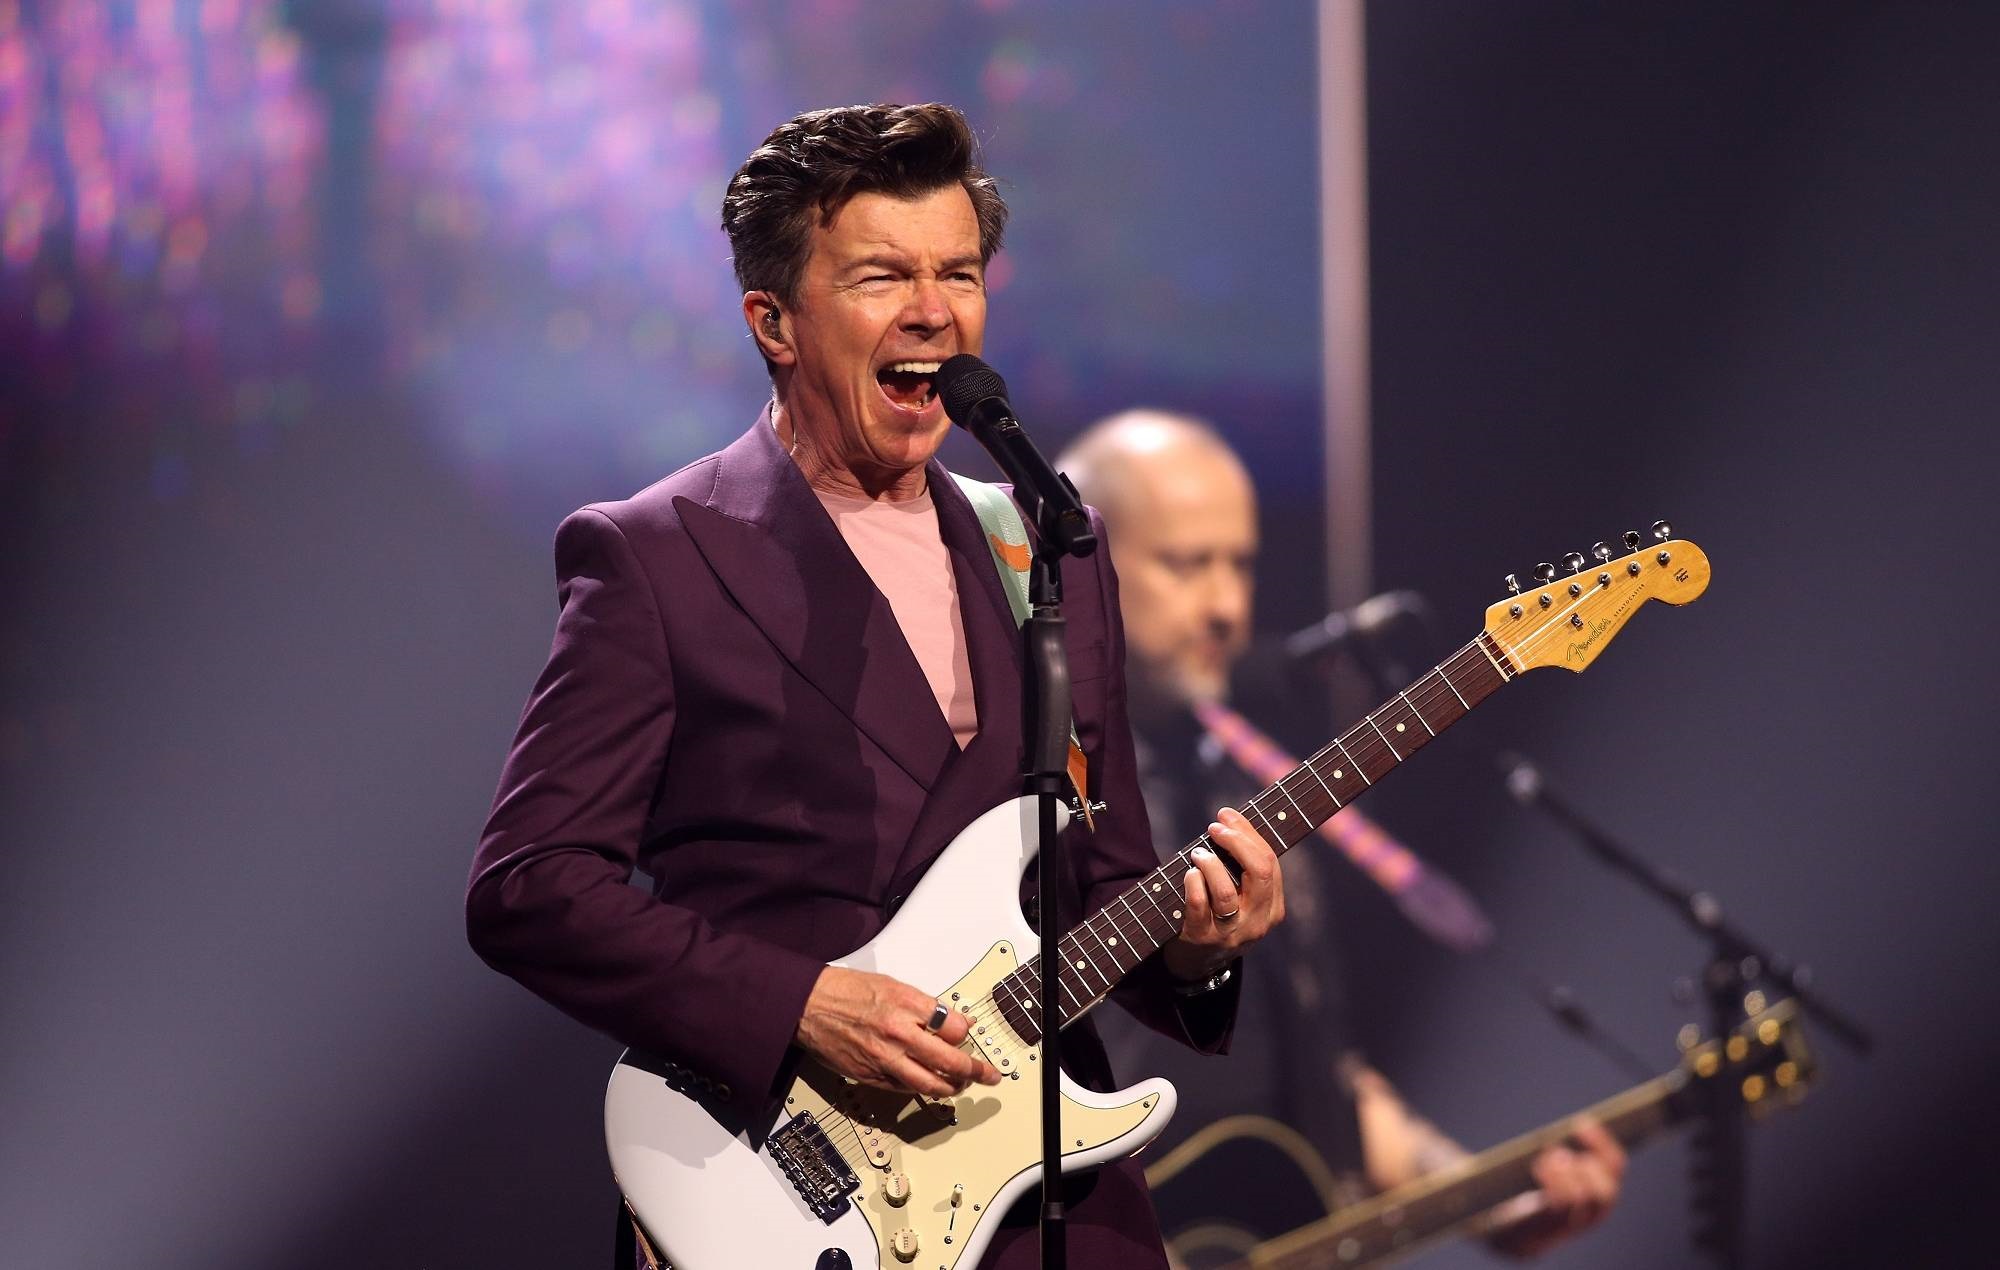 Rick Astley opens UK’s new biggest indoor arena in Manchester, after some test gig tickets were axed for fans